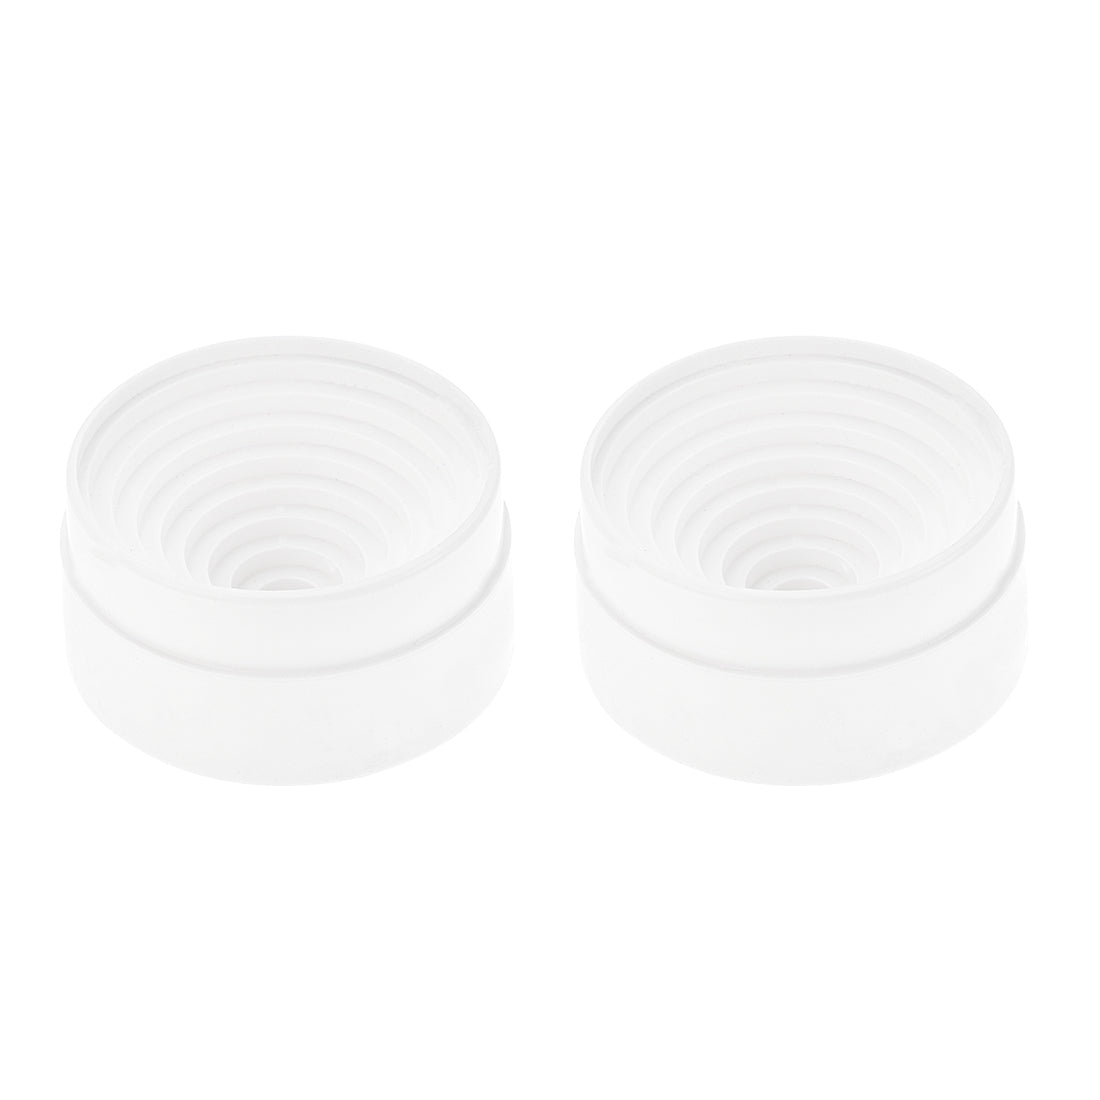 uxcell Uxcell Lab Flask Support Plastic Stand 90mm Diameter Round Bottom Holder for 50ml-1000ml Flasks White 2Pcs